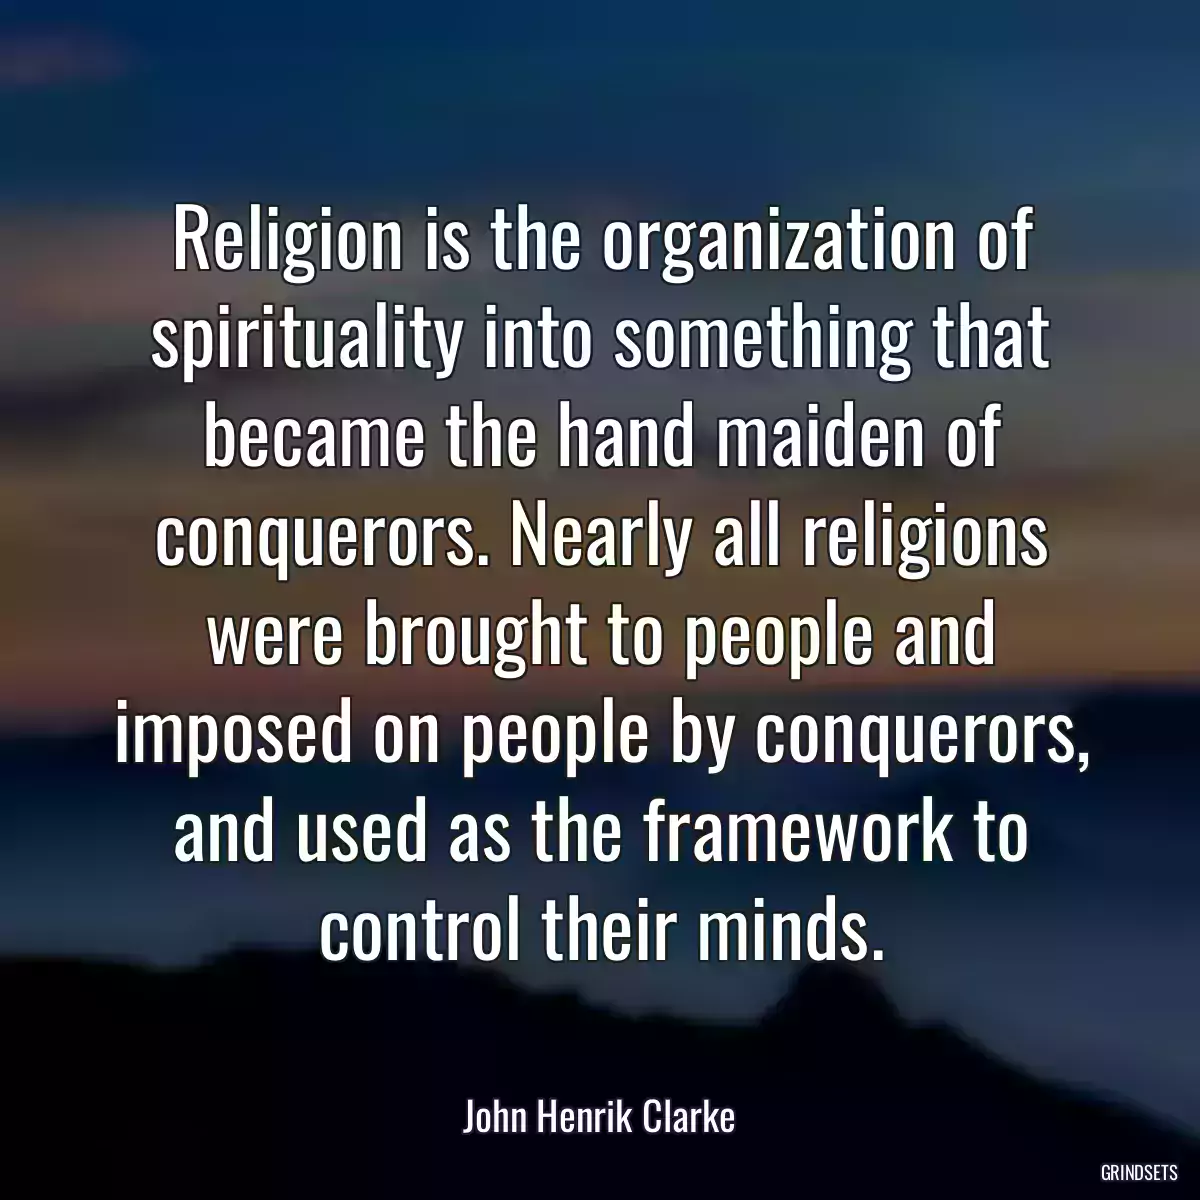 Religion is the organization of spirituality into something that became the hand maiden of conquerors. Nearly all religions were brought to people and imposed on people by conquerors, and used as the framework to control their minds.